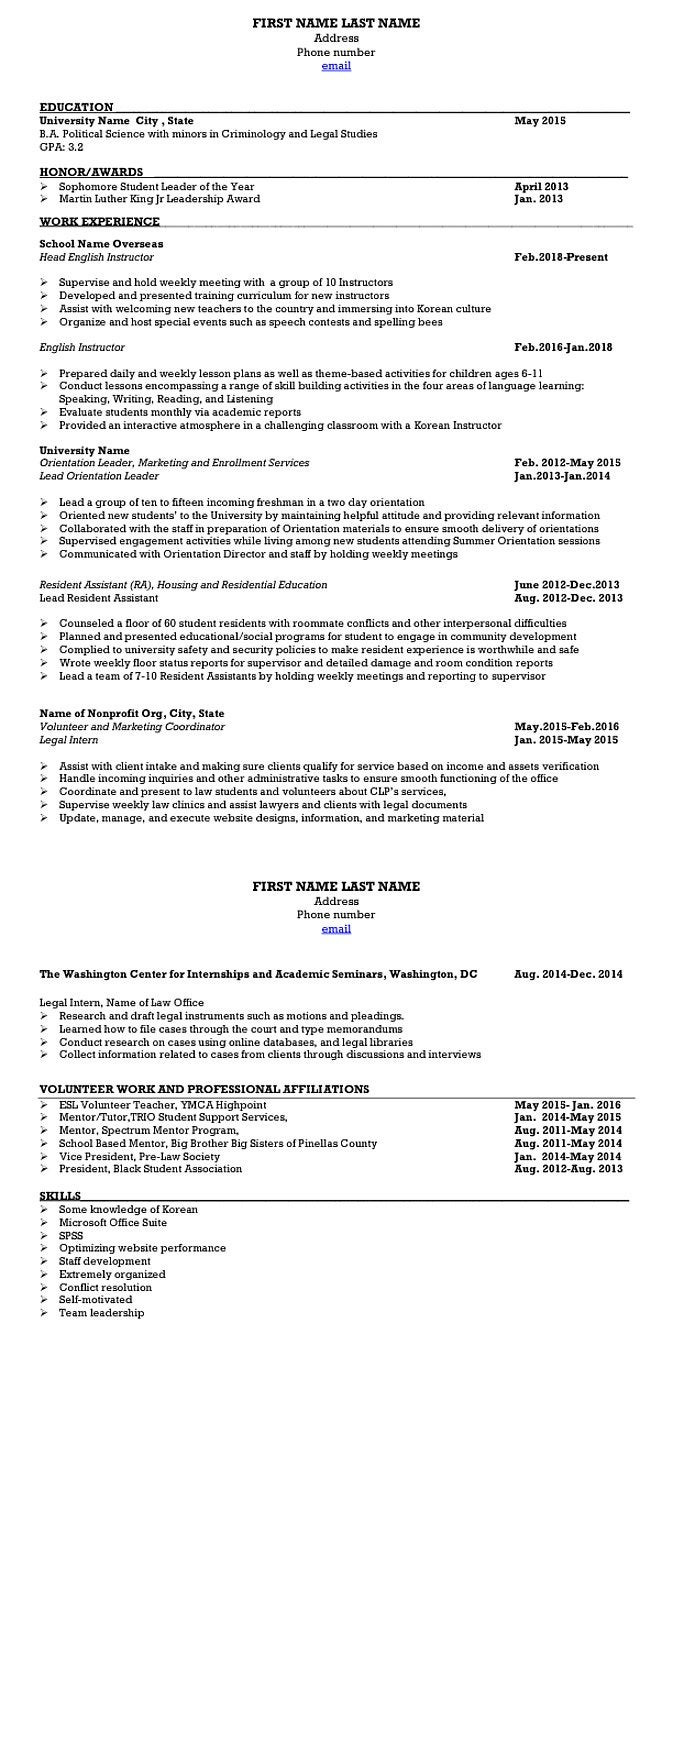 Resume Template for Grad School Application Applying to Graduate School Please Help with Resume : R/resumes